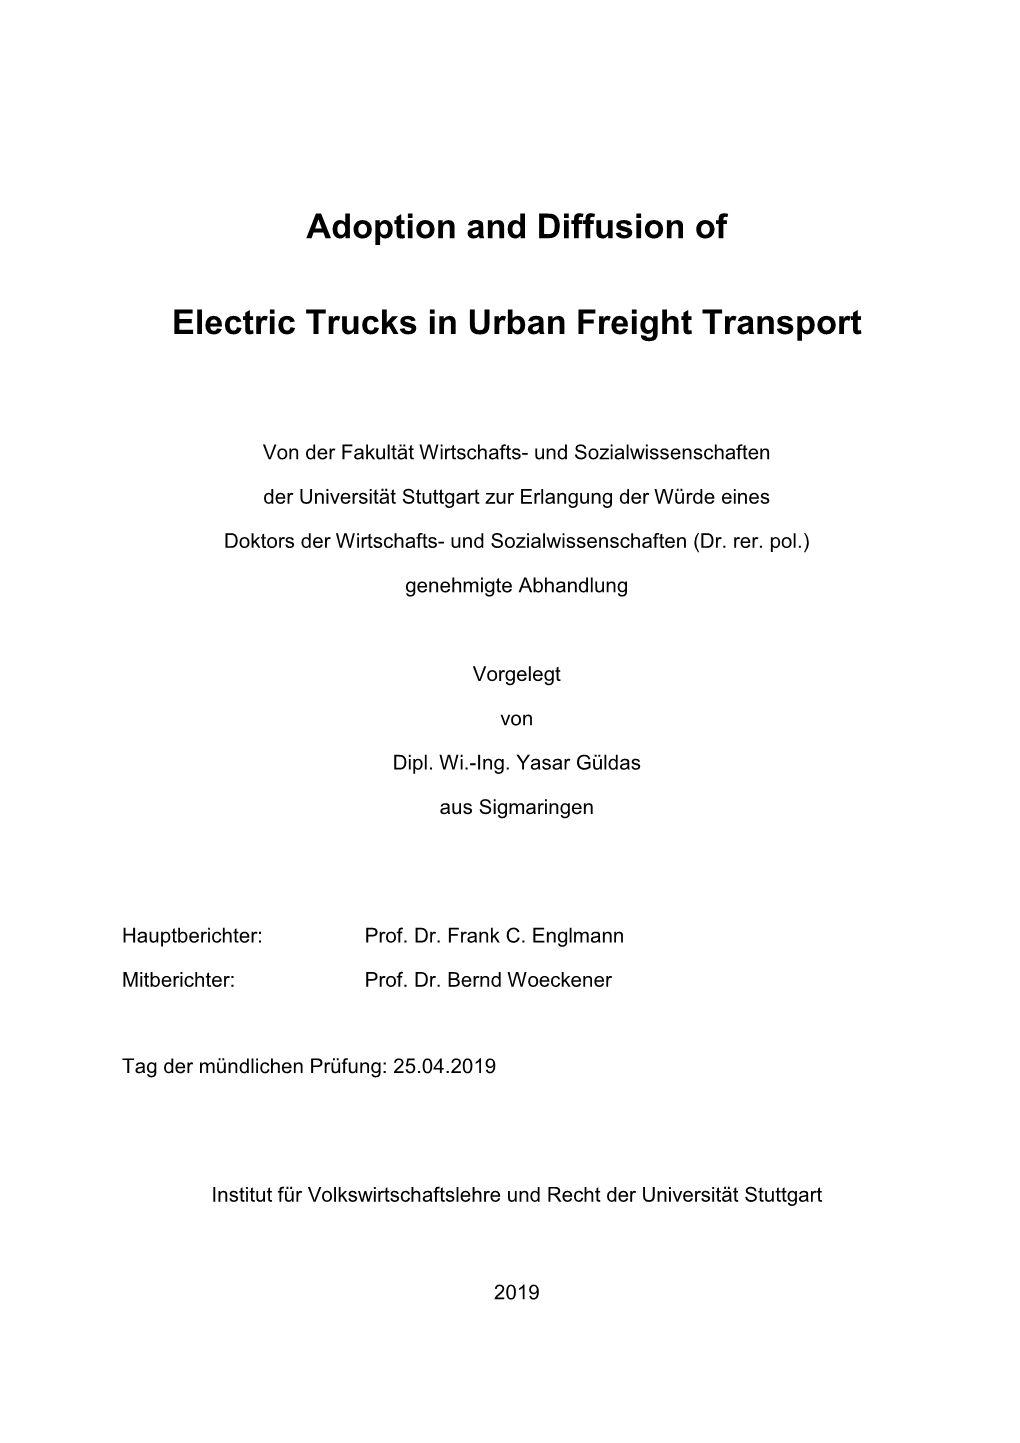 Adoption and Diffusion of Electric Trucks in Urban Freight Transport